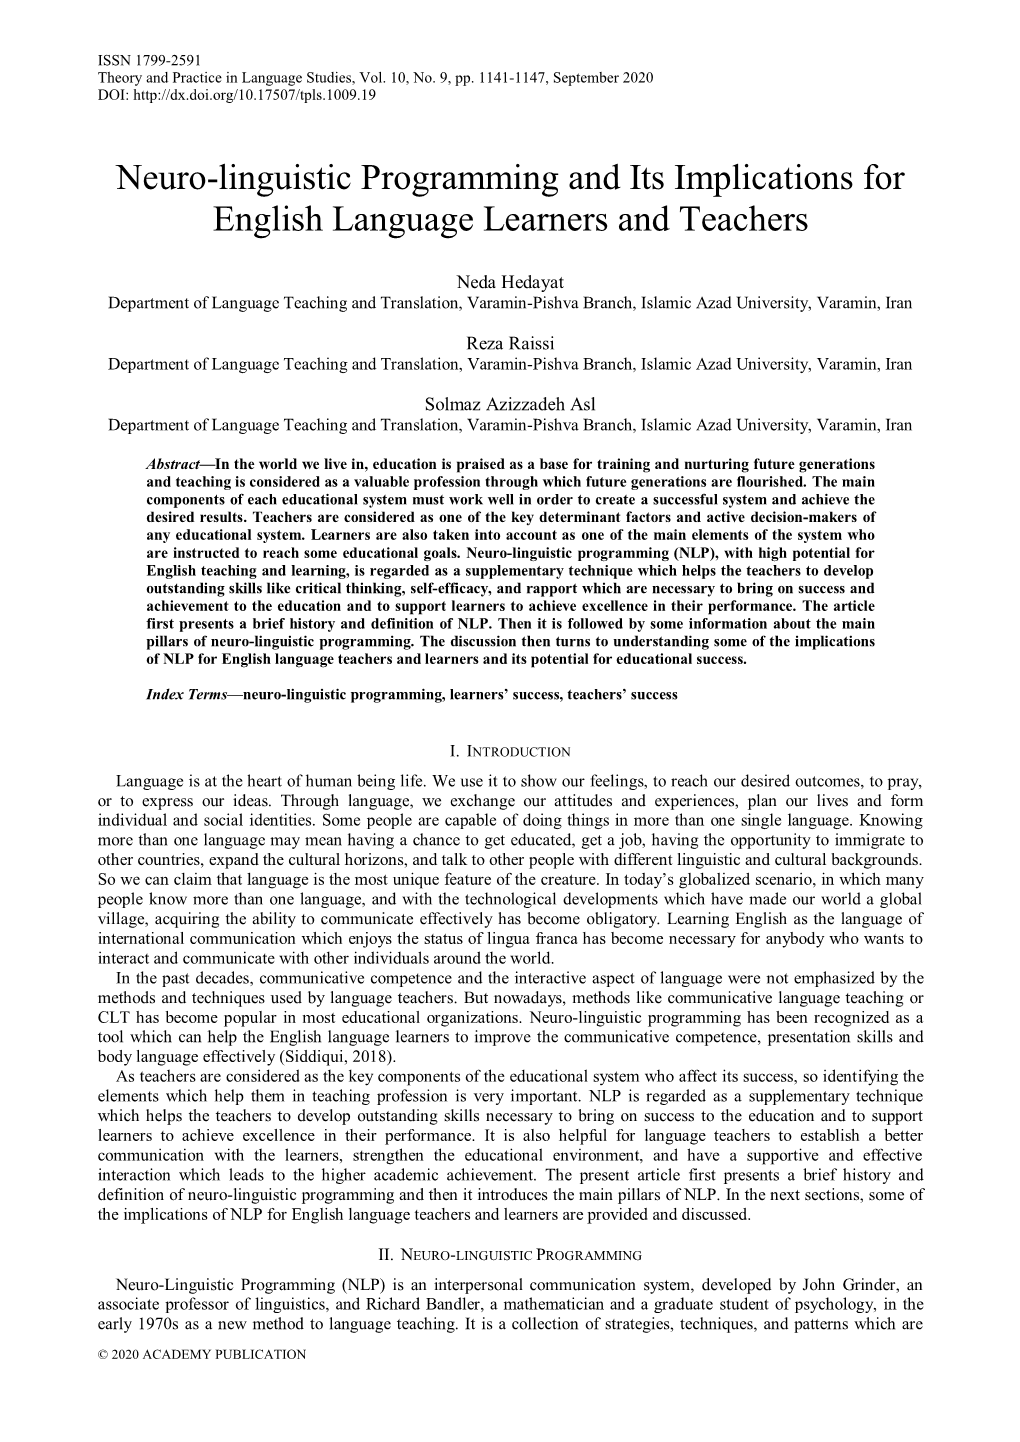 Neuro-Linguistic Programming and Its Implications for English Language Learners and Teachers